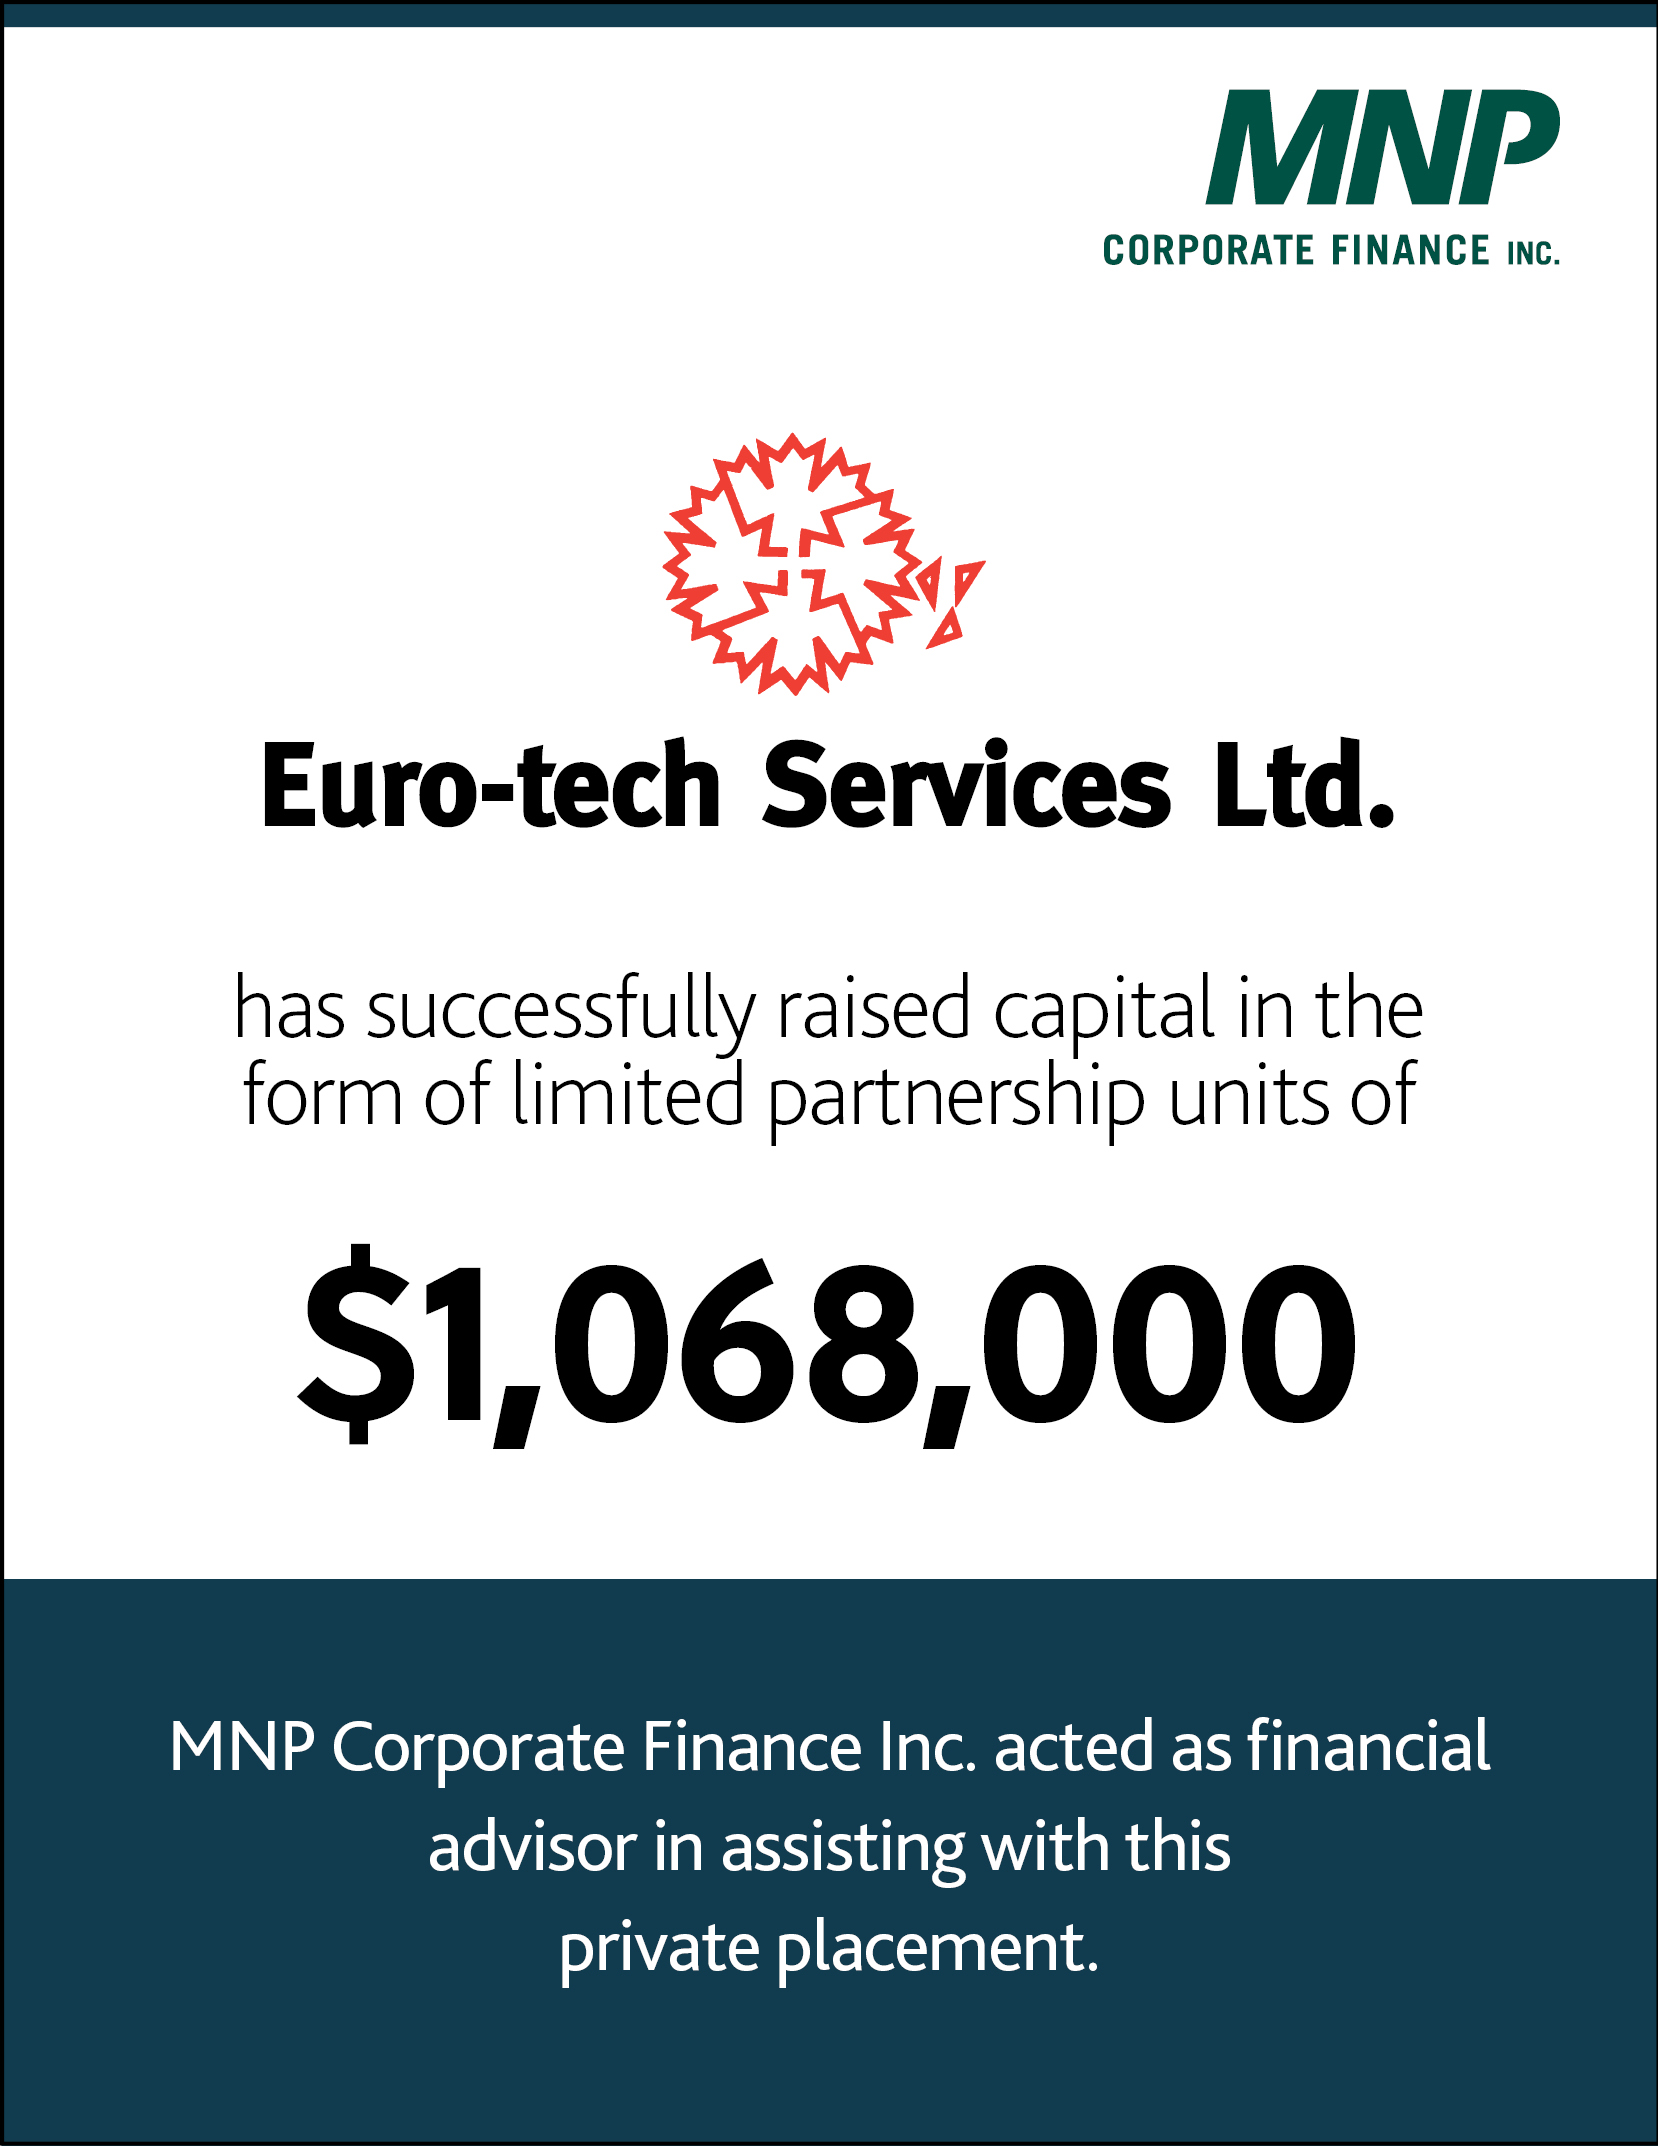 Euro-Tech Service Ltd has successfully raised capital in the form of limited partnership units of $1,068,000